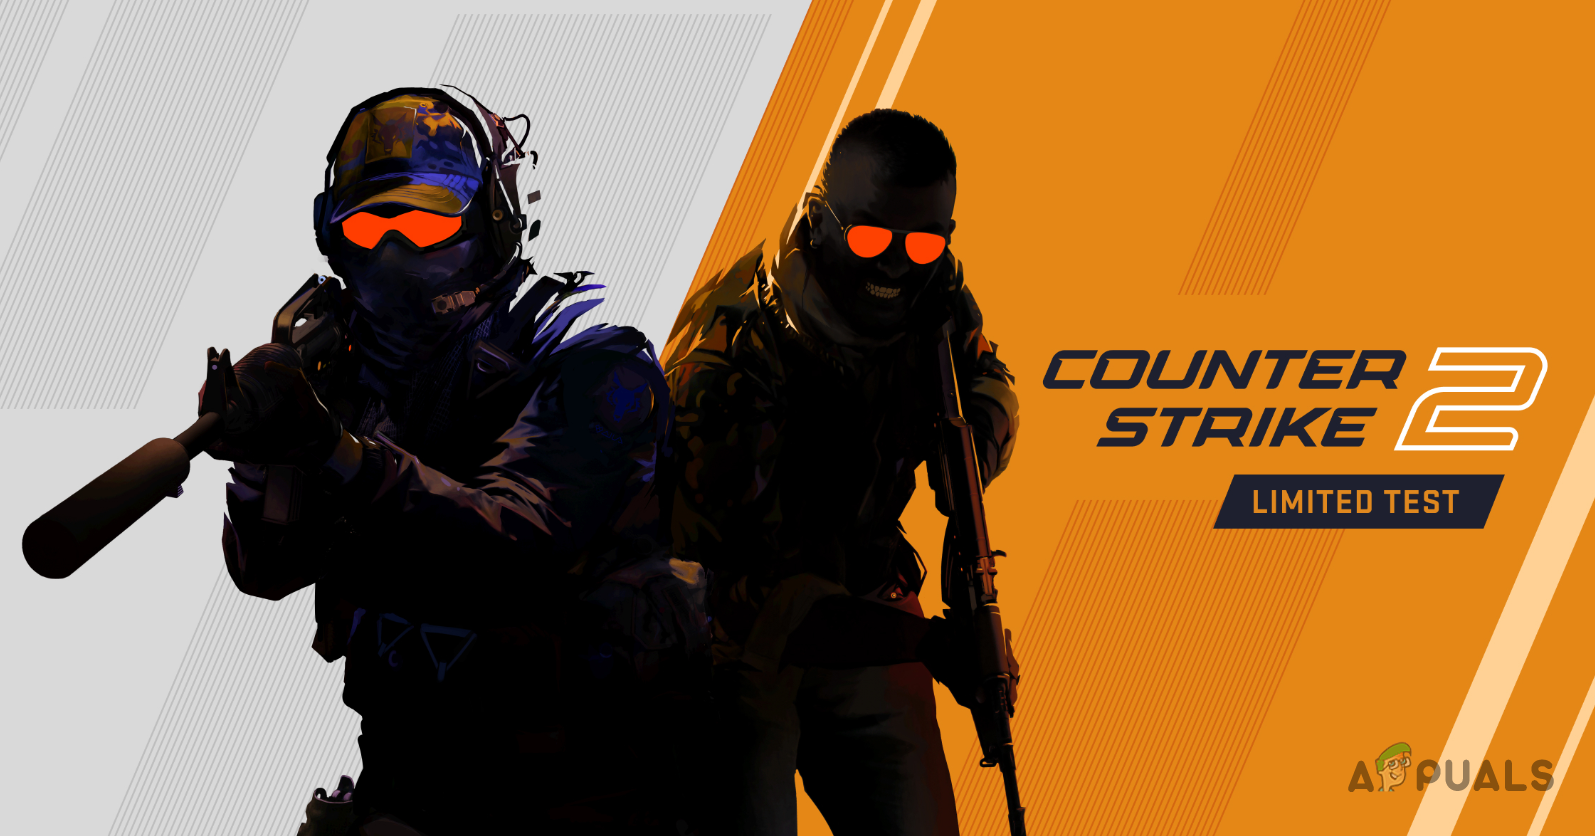 How to Reduce Input Lag in Counter Strike 2 (5 EASY Steps)